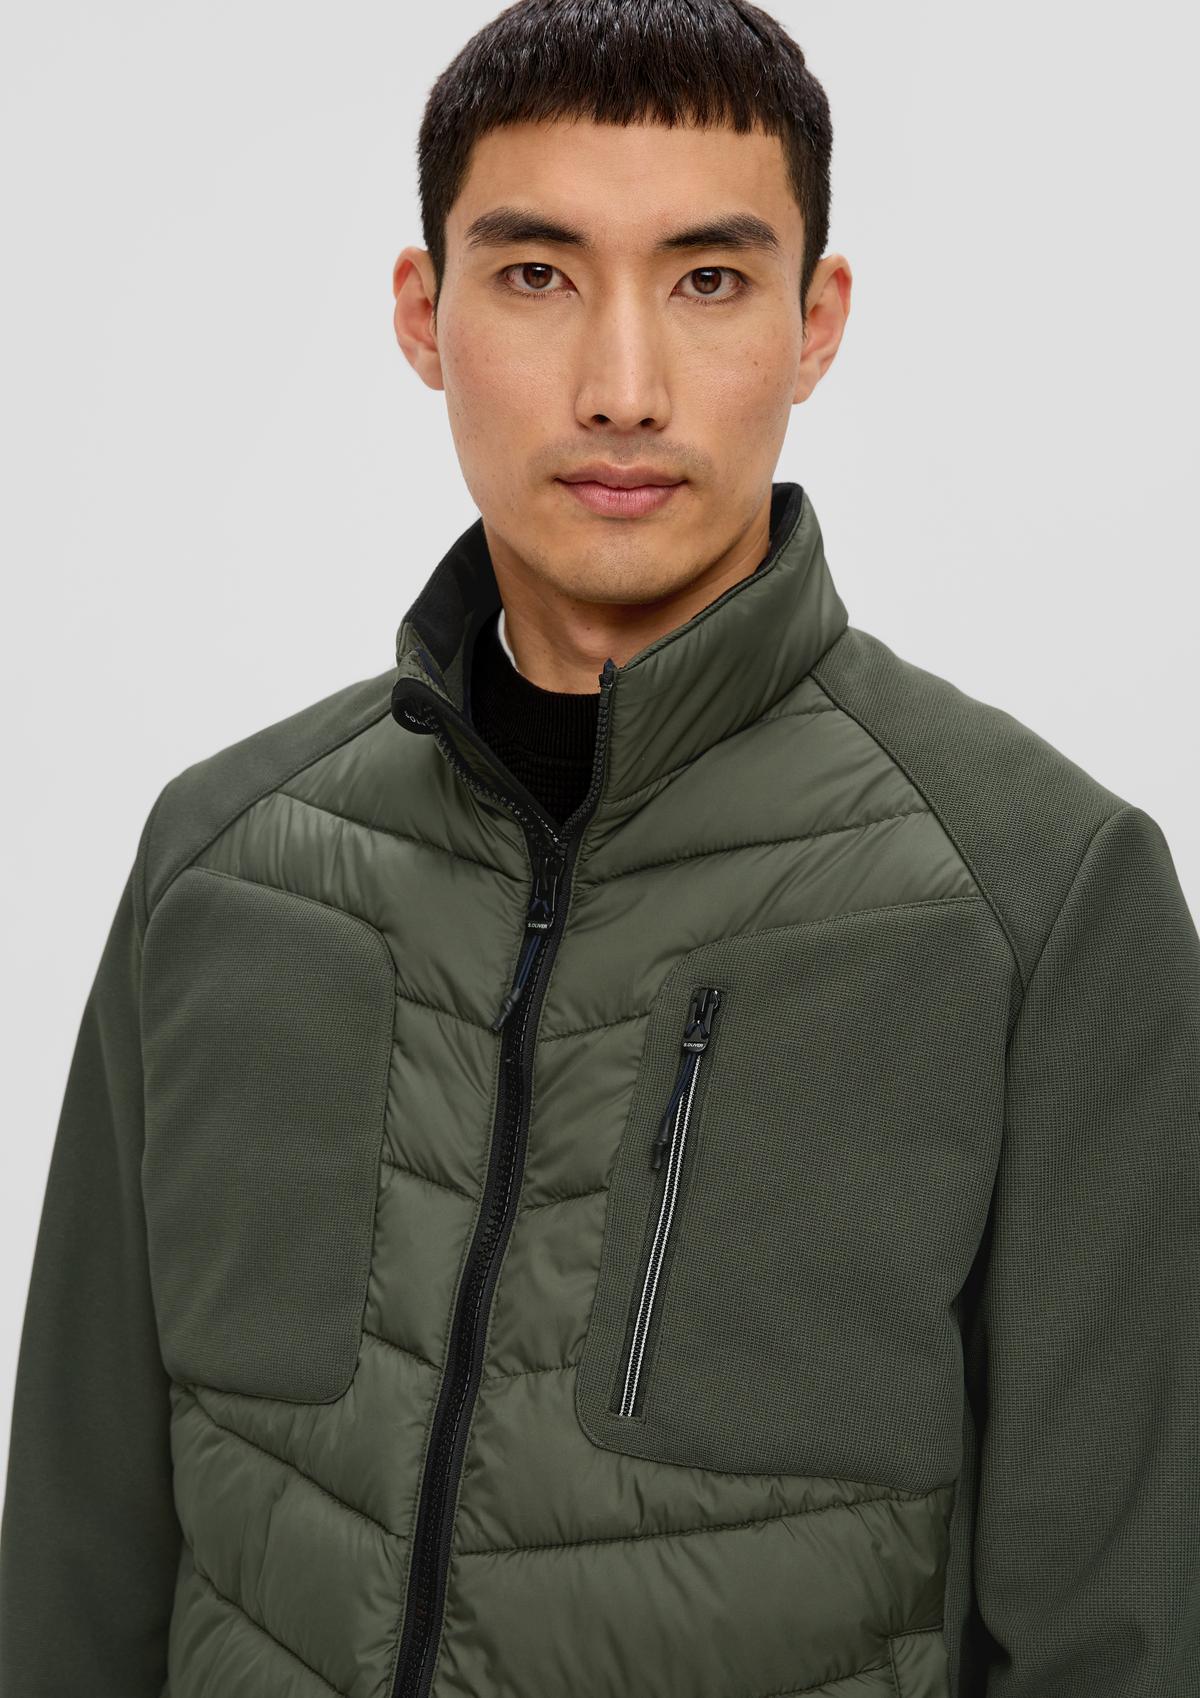 s.Oliver Softshell jacket with contrasting details